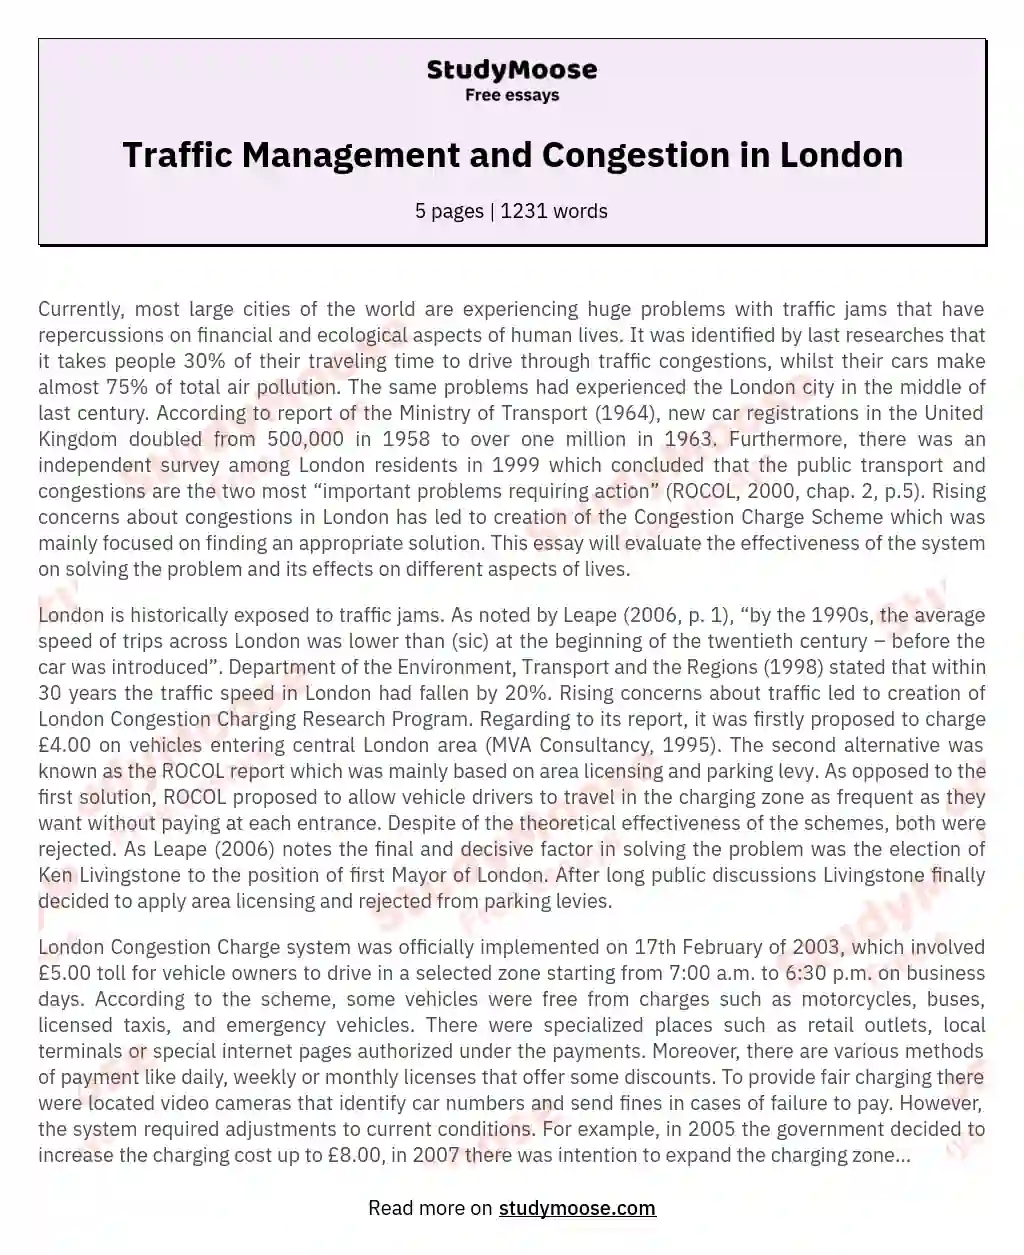 Traffic Management and Congestion in London